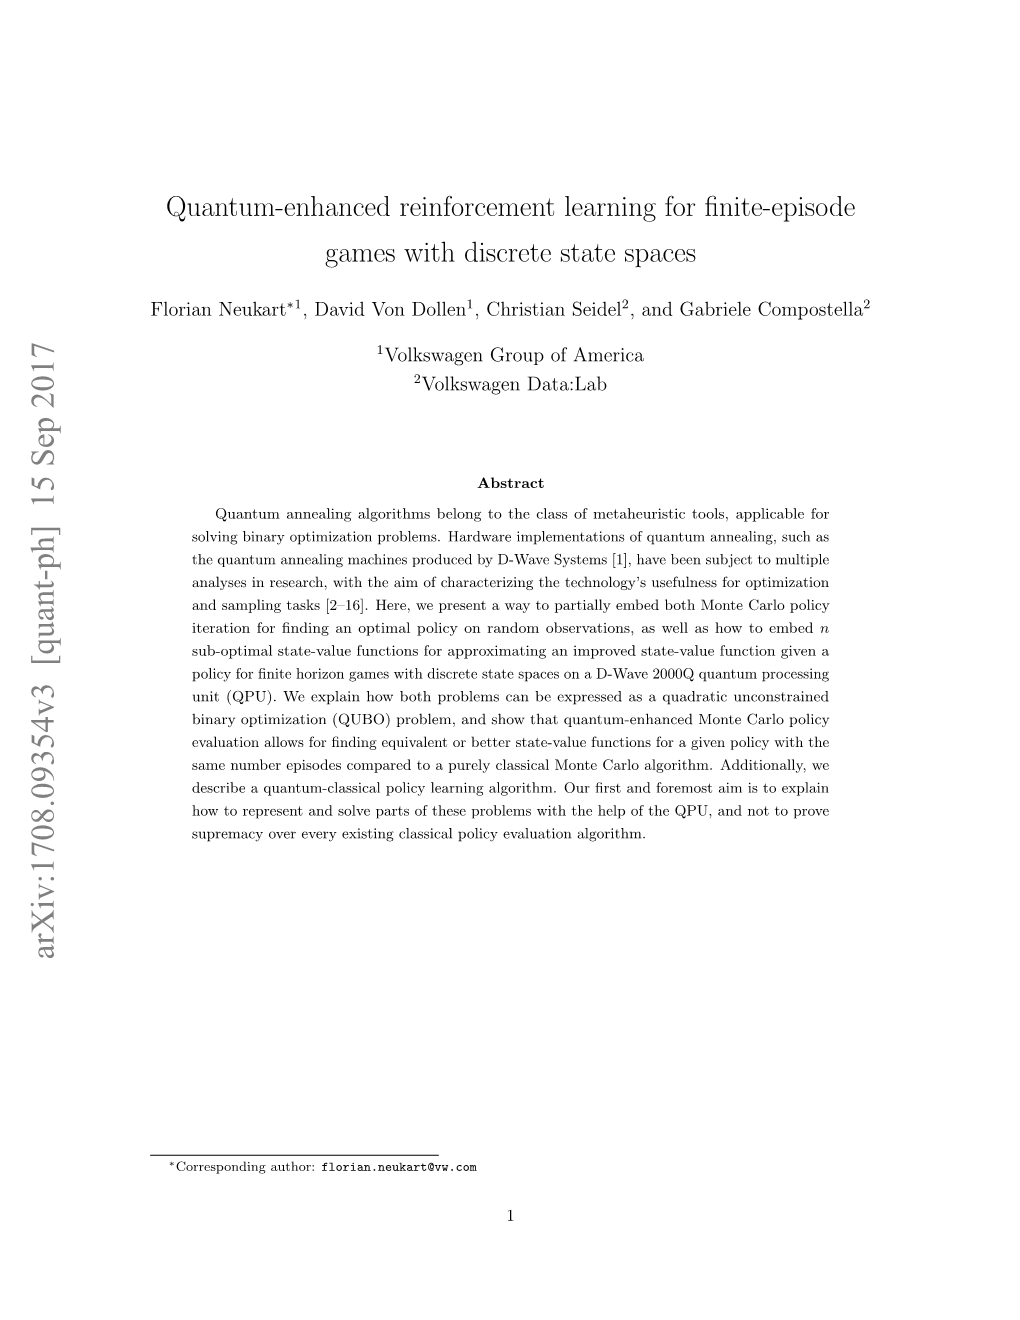 Quantum-Enhanced Reinforcement Learning for Finite-Episode Games